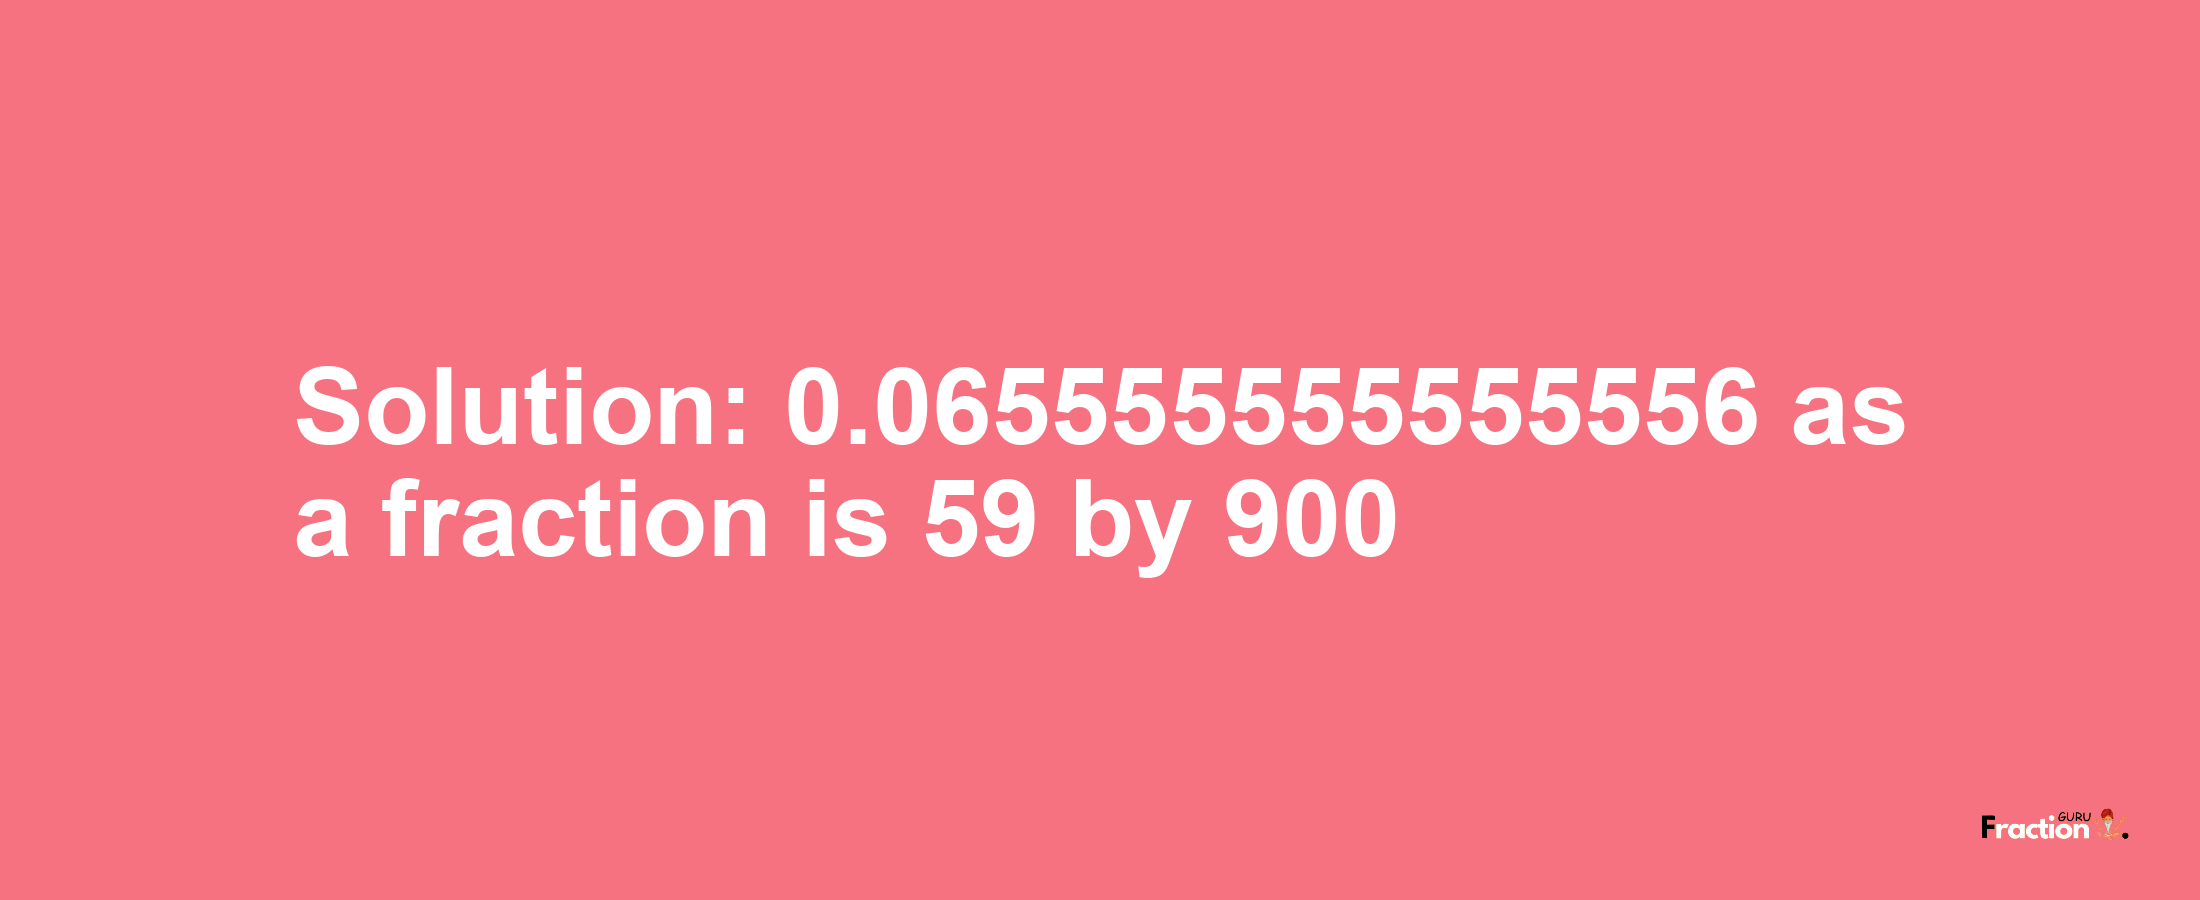 Solution:0.065555555555556 as a fraction is 59/900